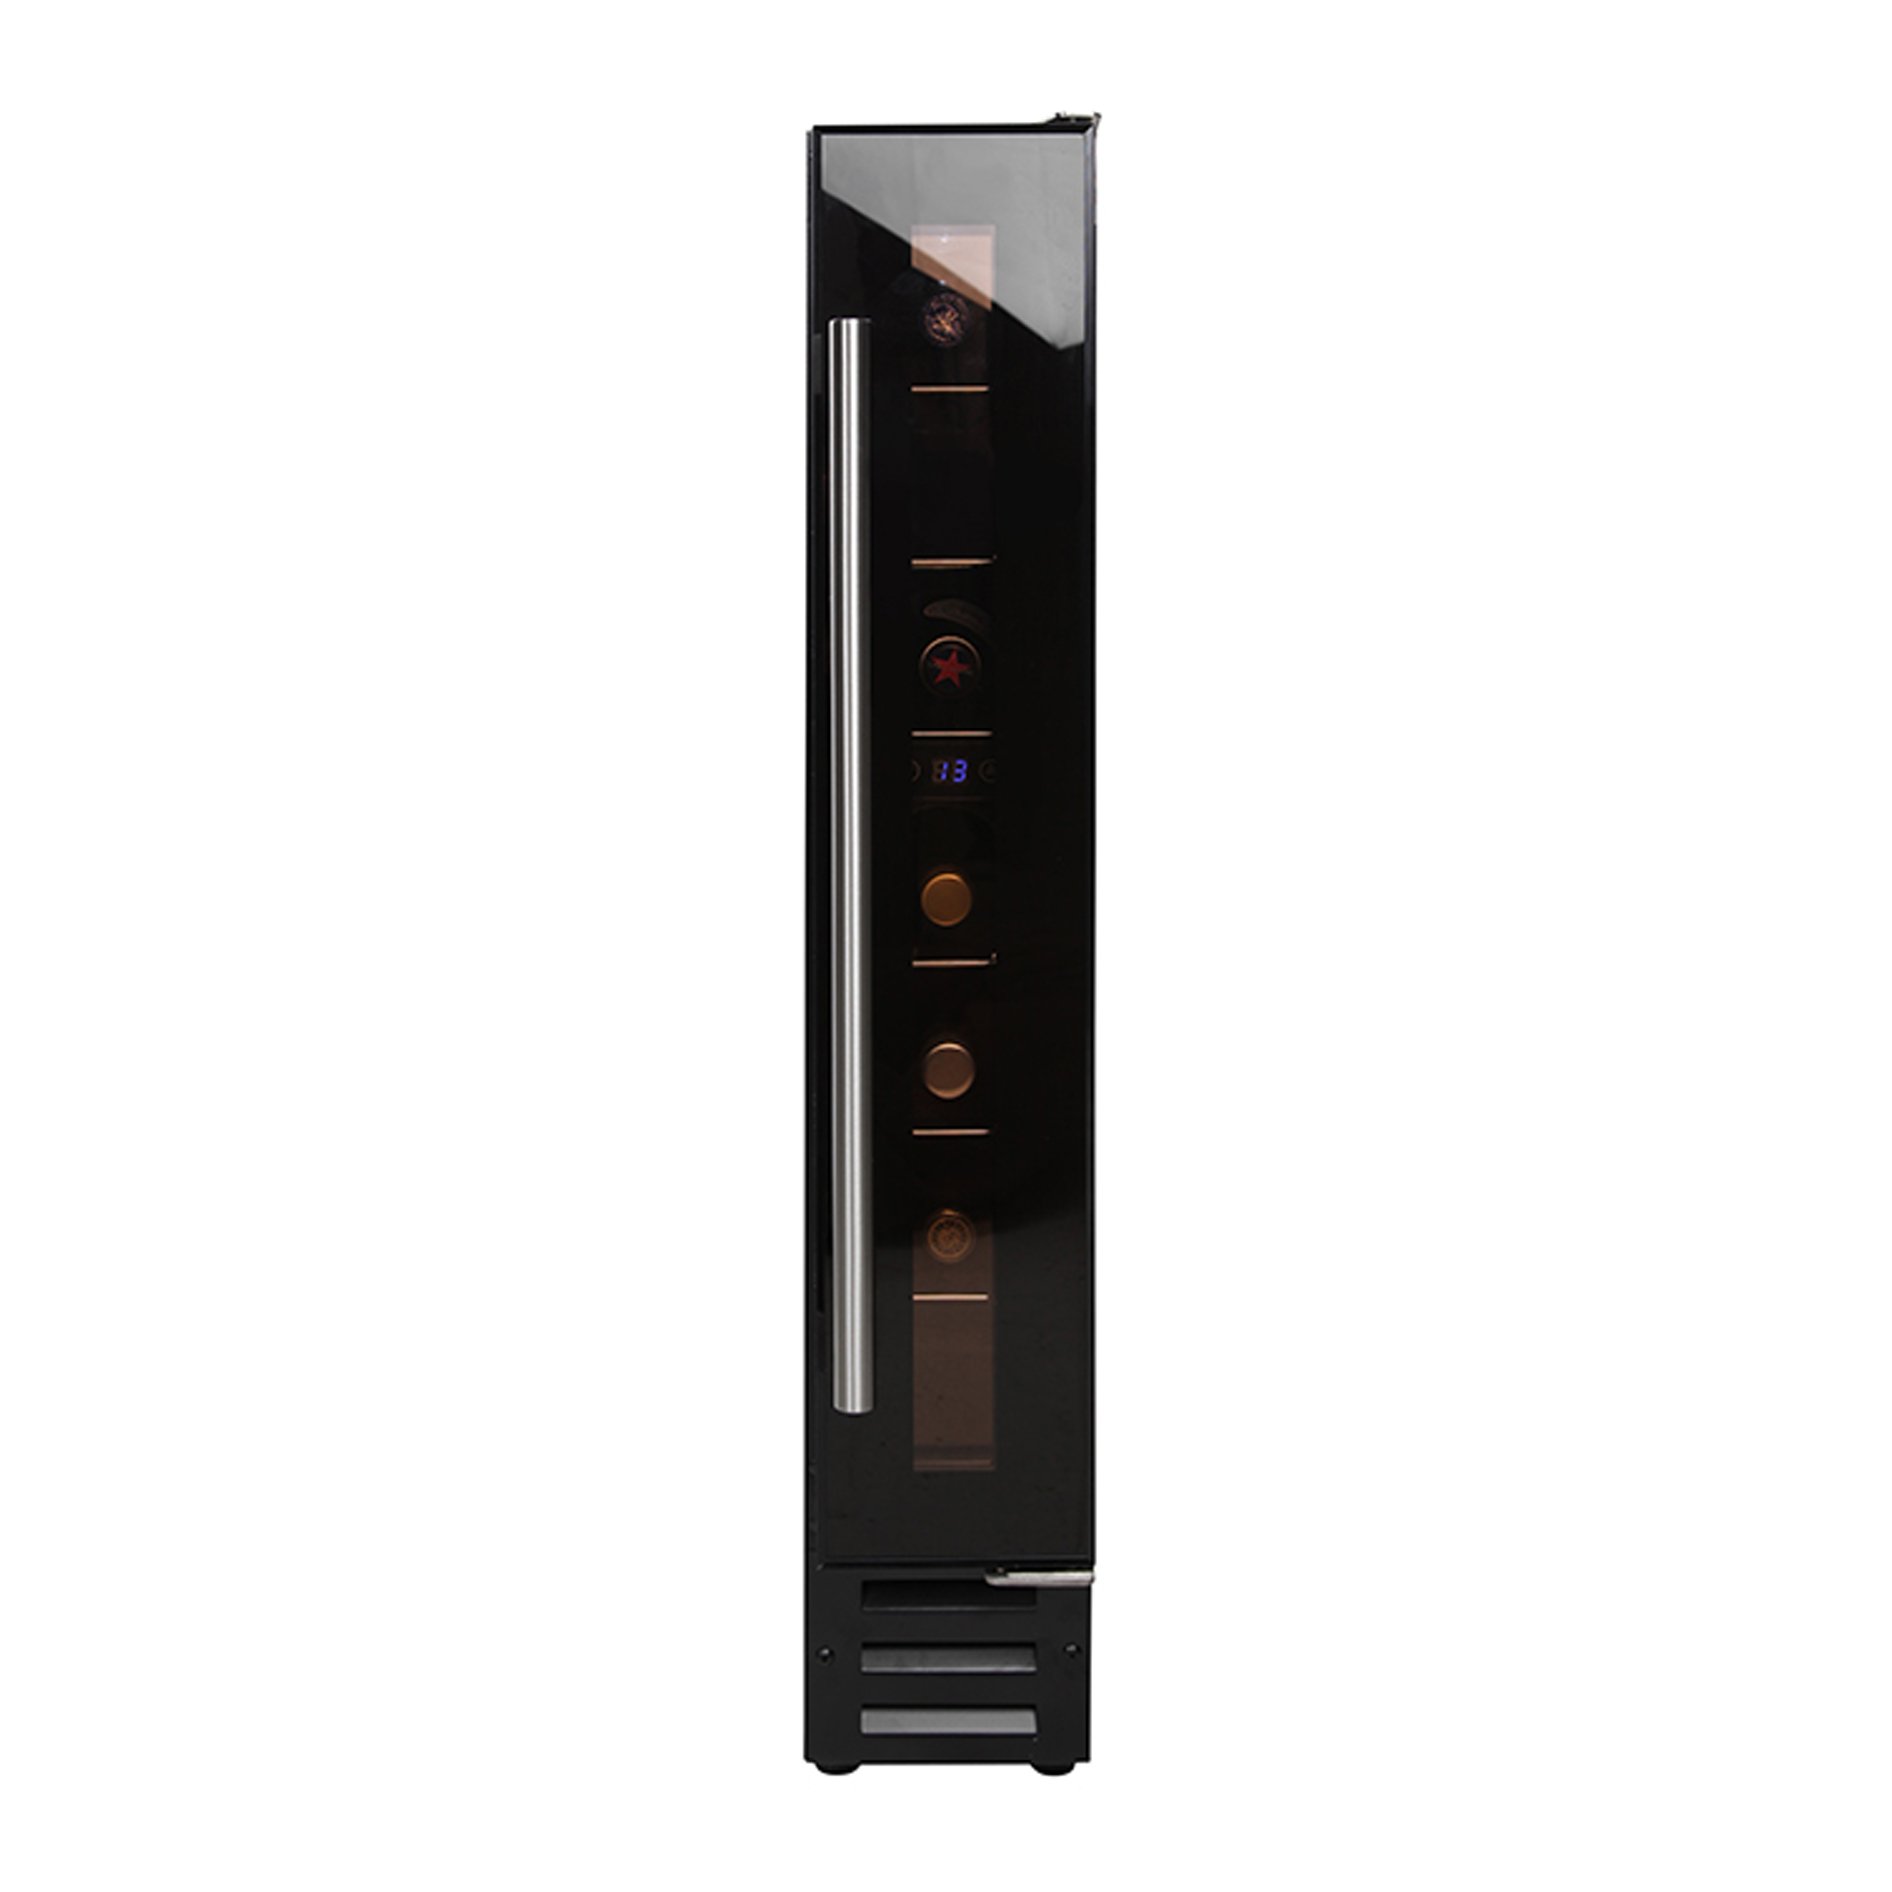 Integrated 15cm wine cooler has a 22 litre capacity which equates to approximately 7 bottles. Features include CFC/HFC free, adjustable thermostat and digital temp display.